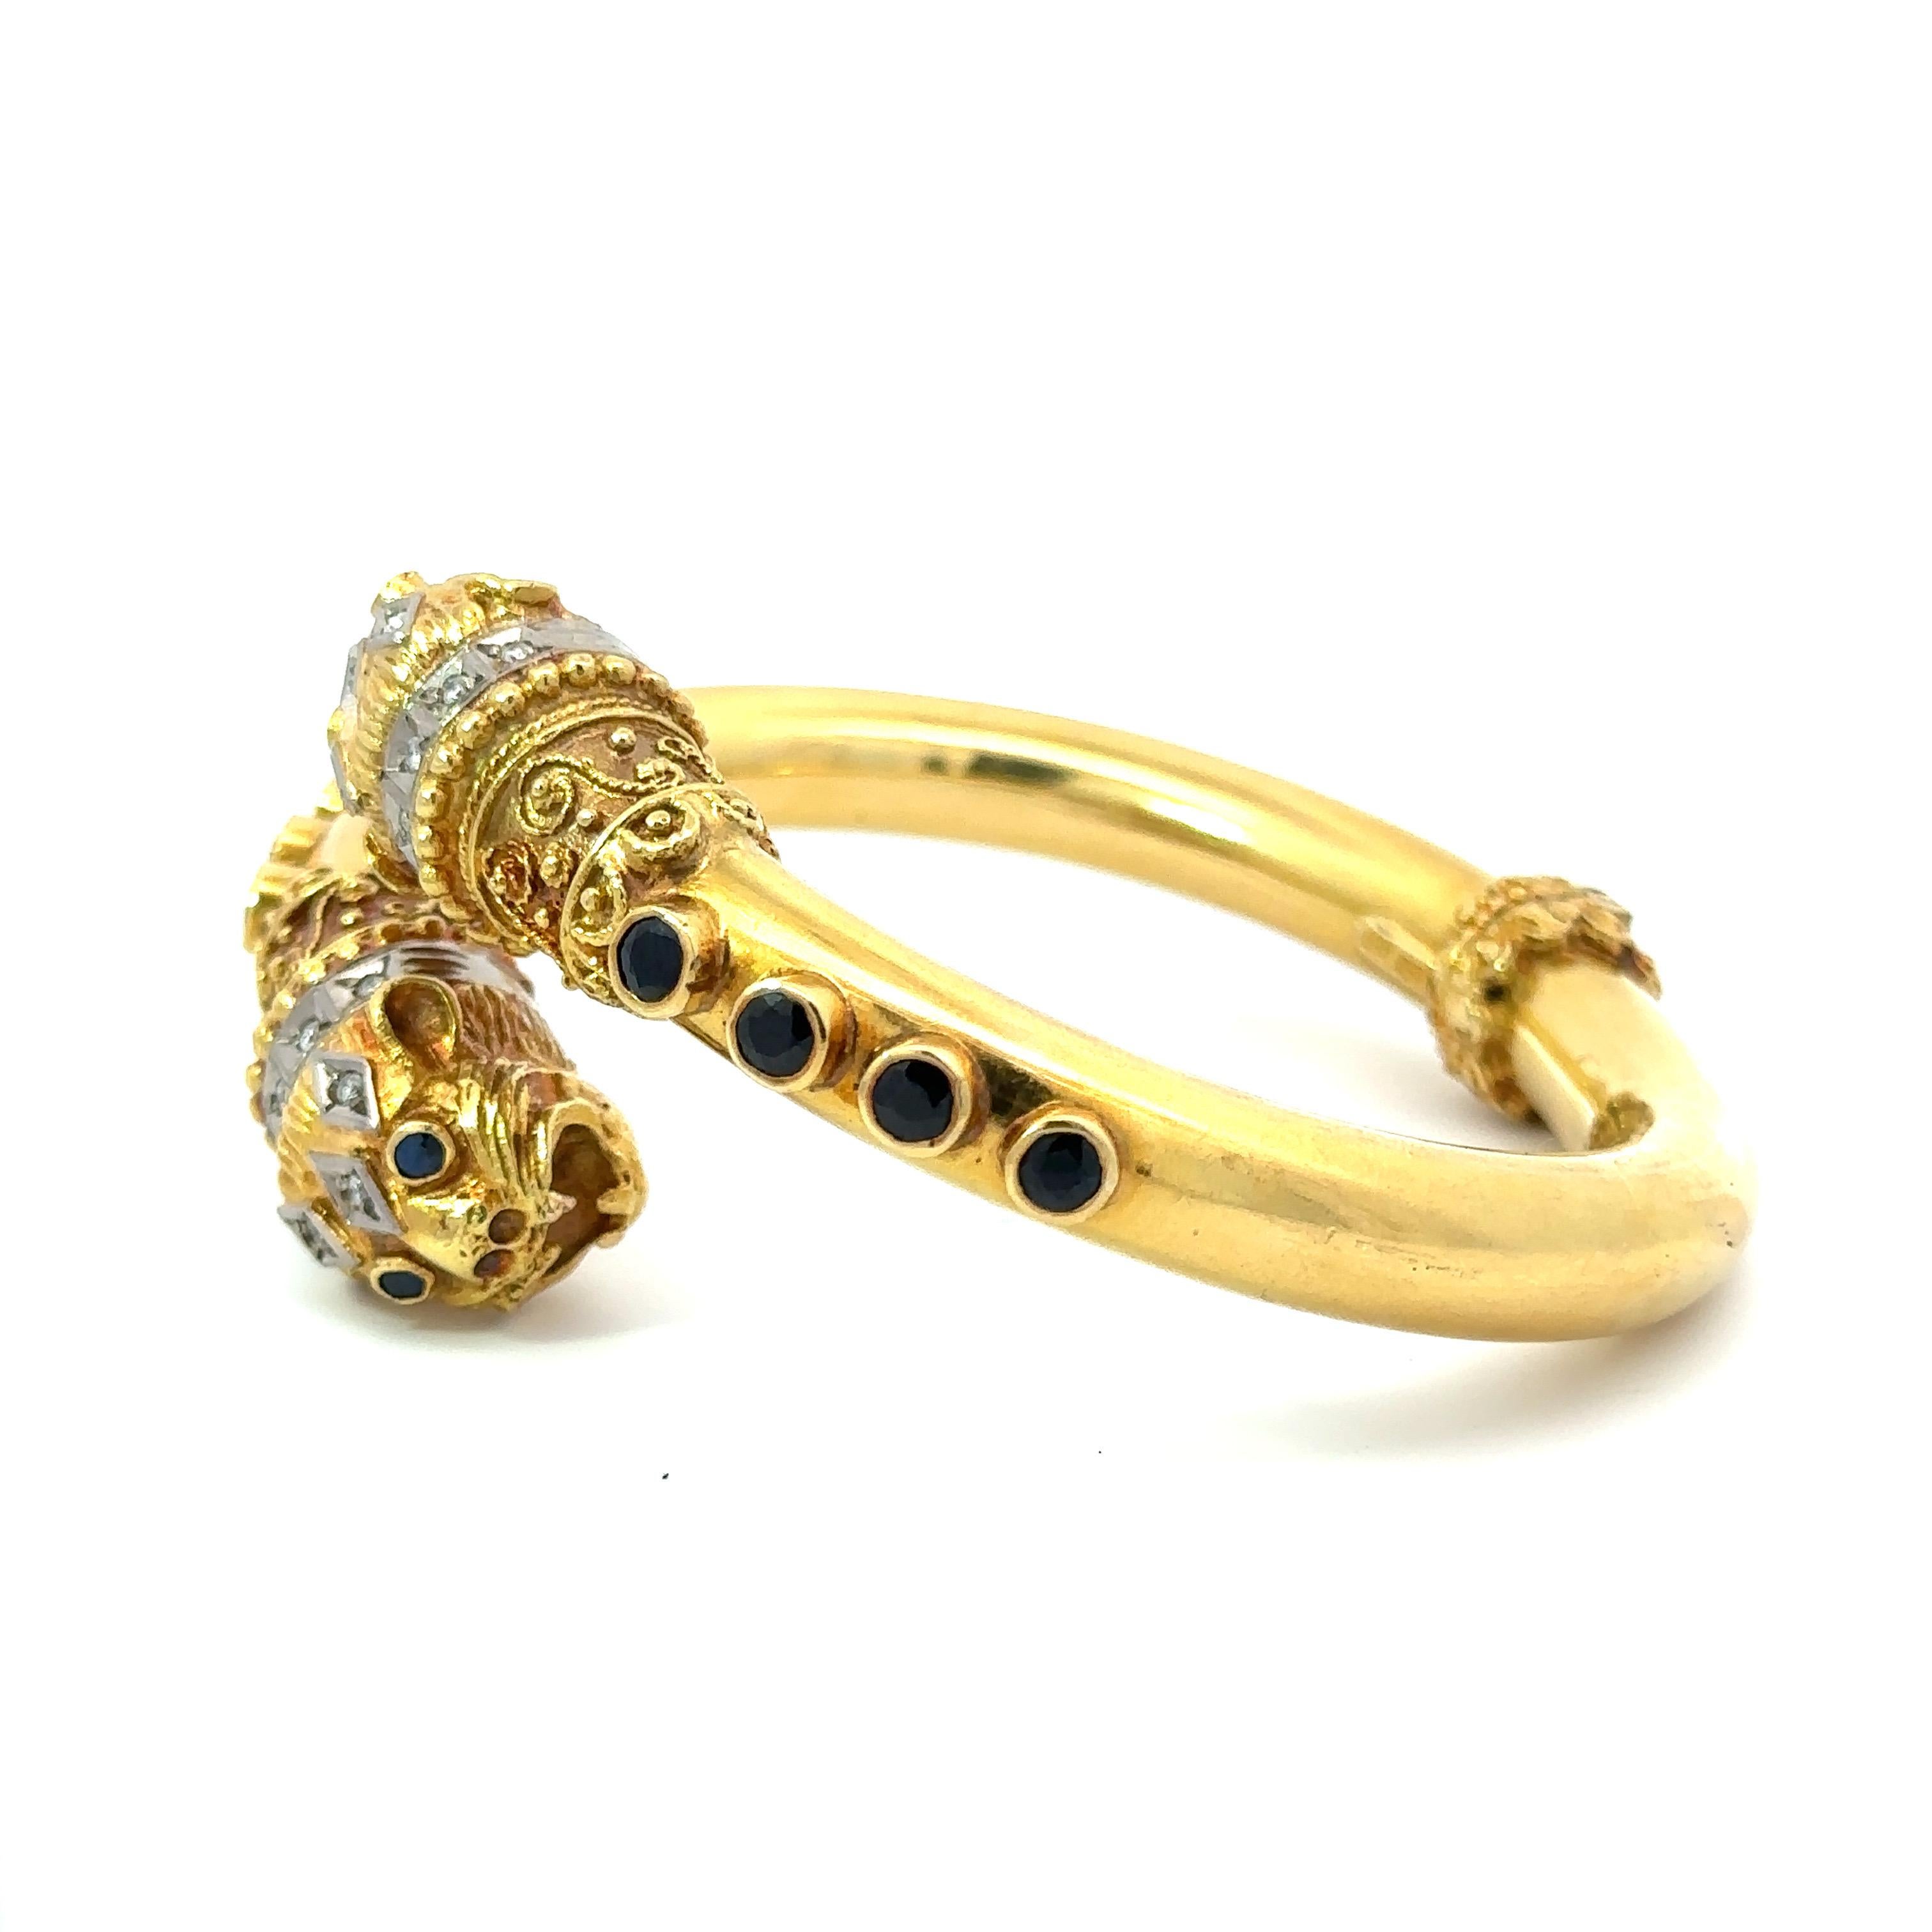 Brilliant Cut Lalaounis Two-Headed 18k Gold Bangle For Sale